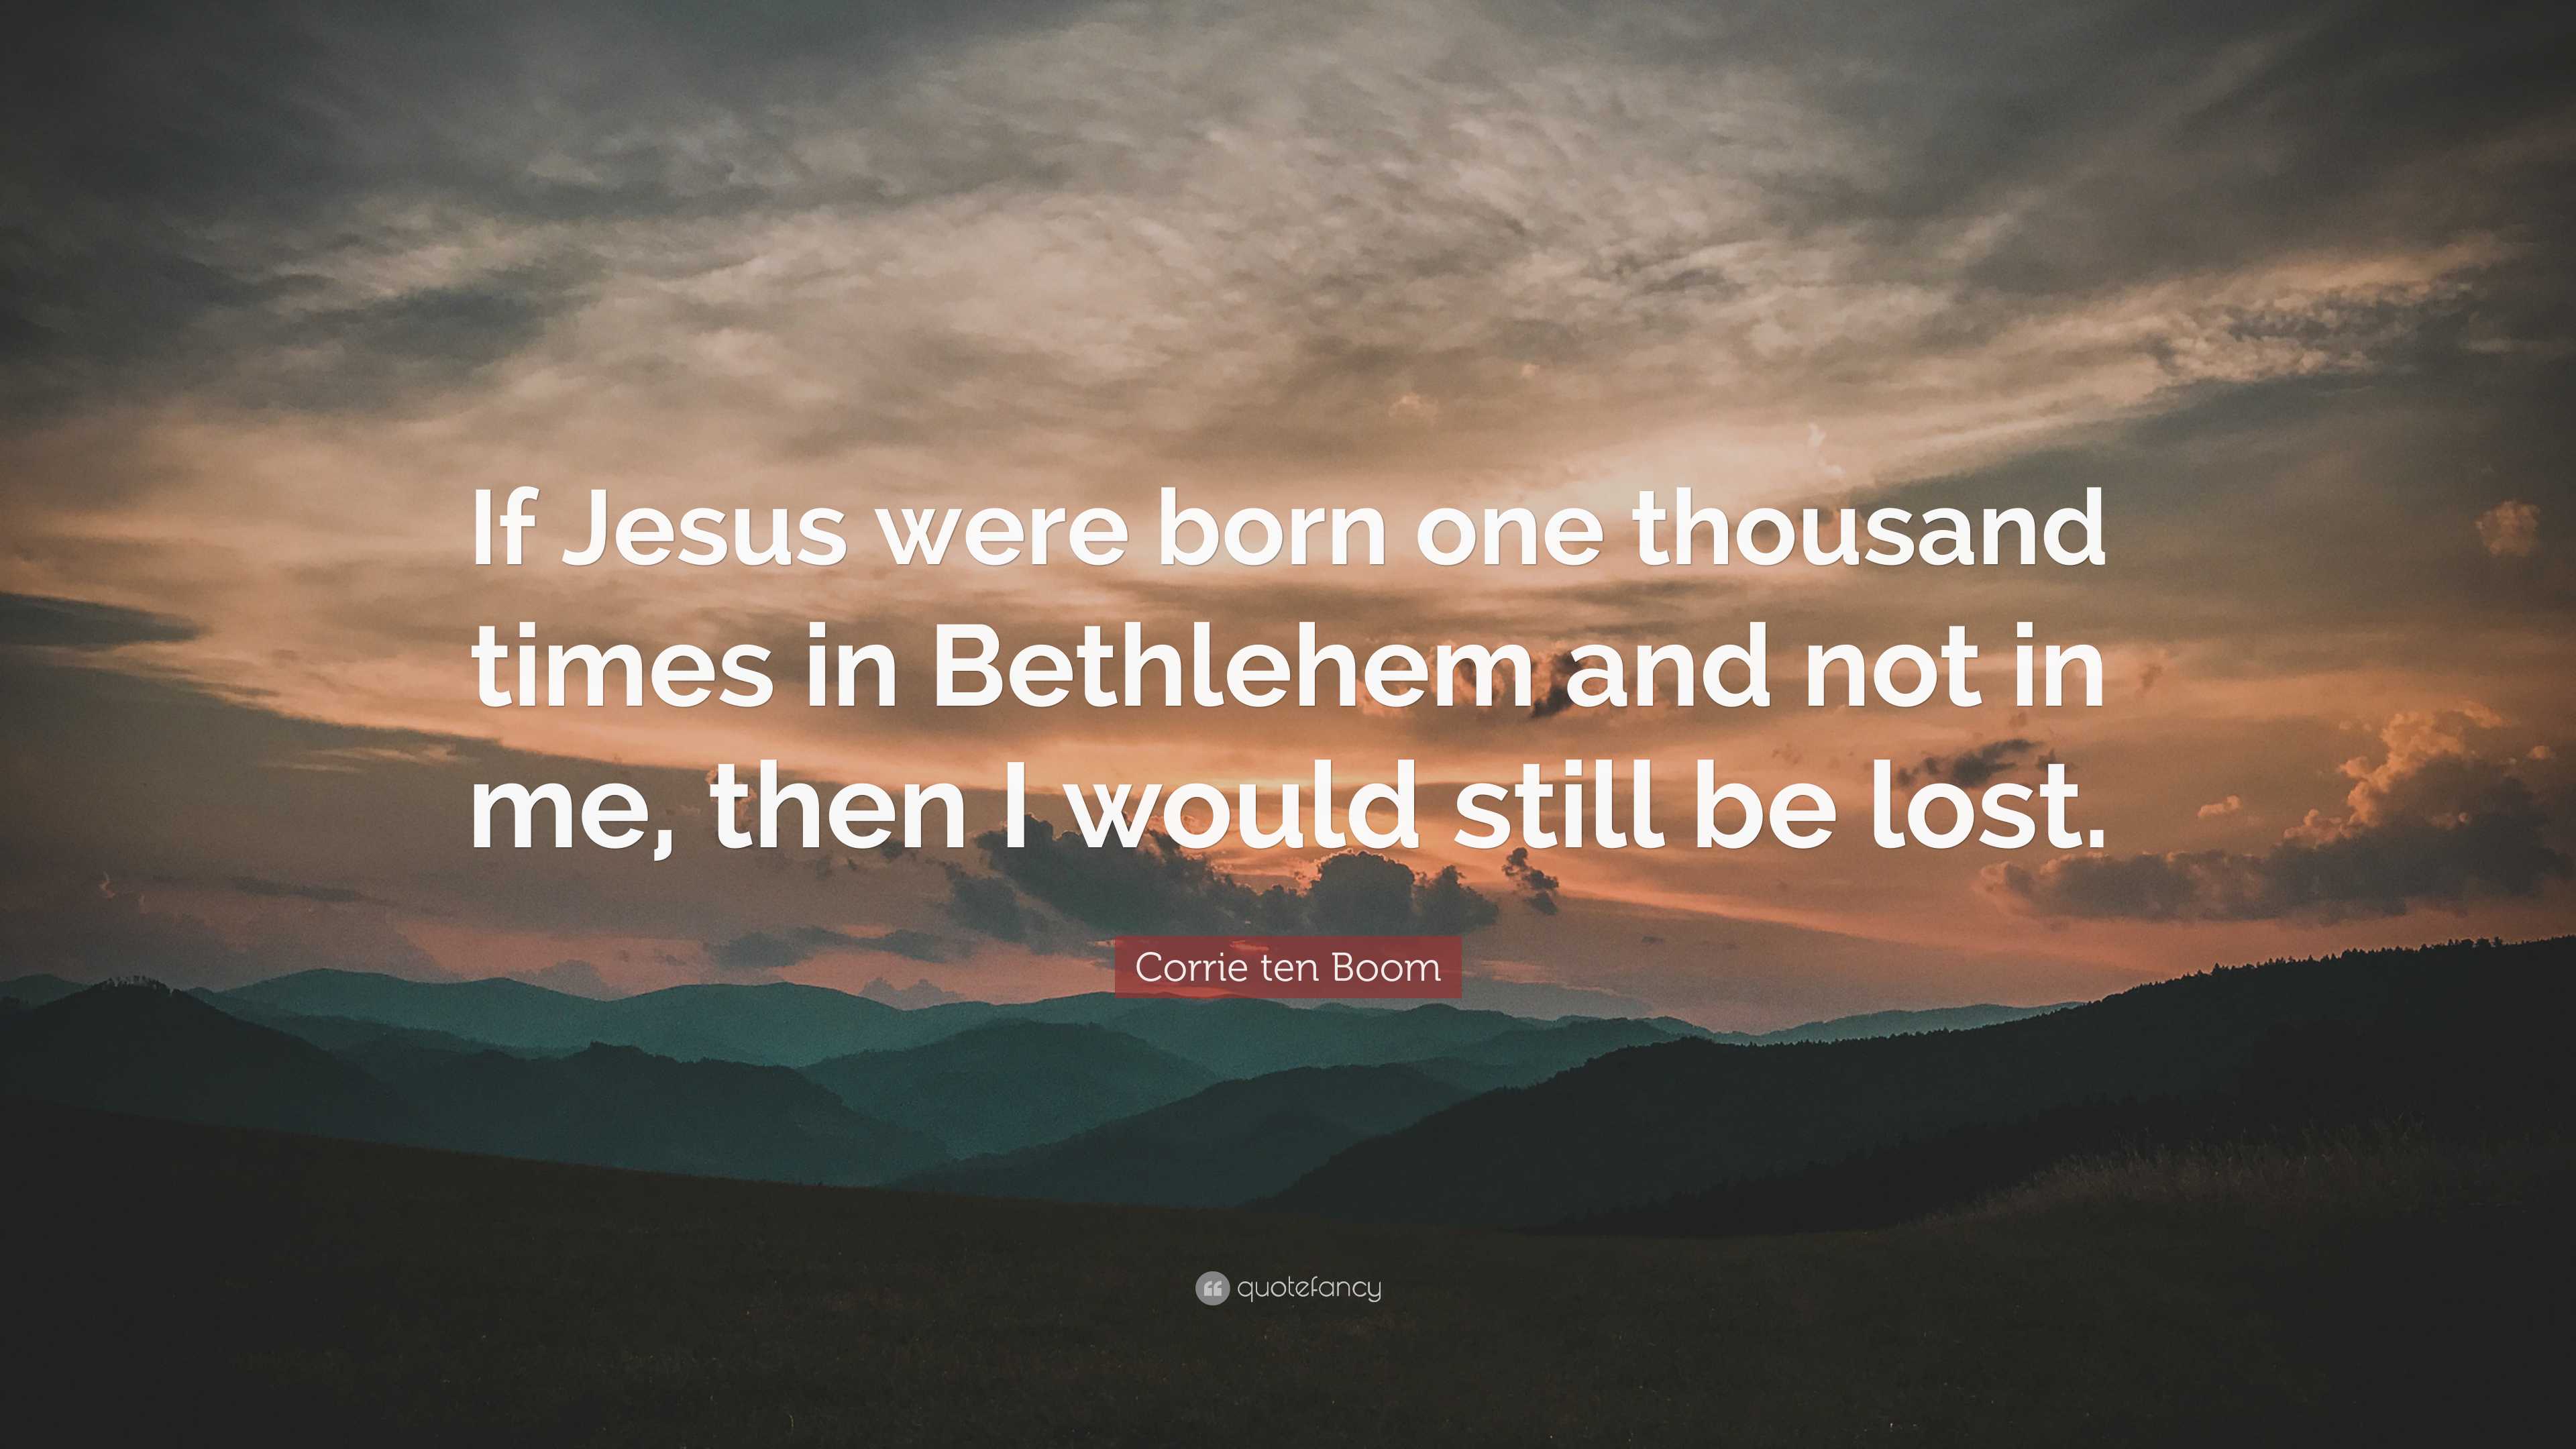 Corrie ten Boom Quote: “If Jesus were born one thousand times in ...